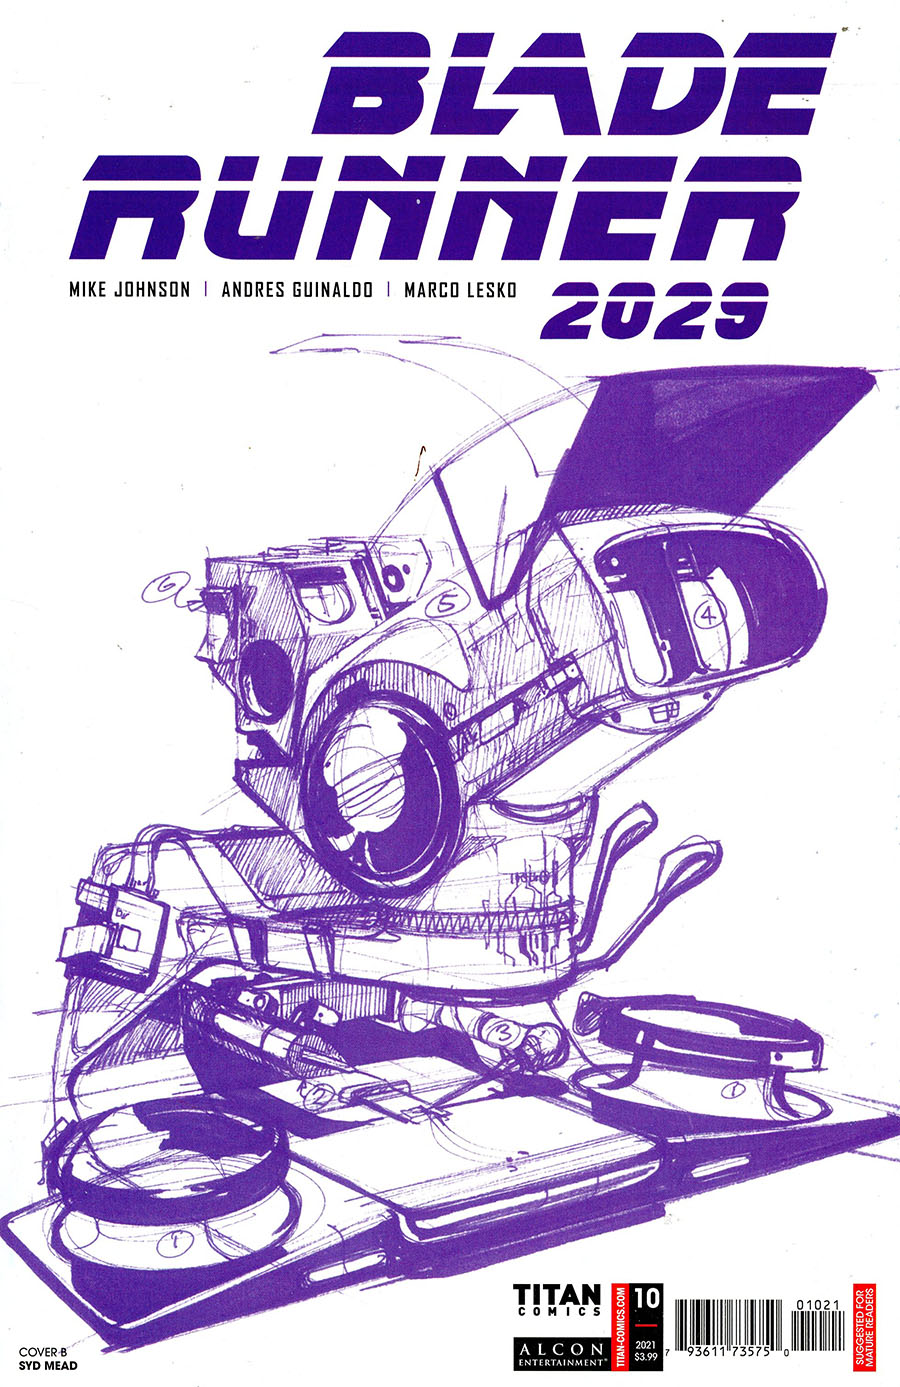 Blade Runner 2029 #10 Cover B Variant Syd Mead Cover